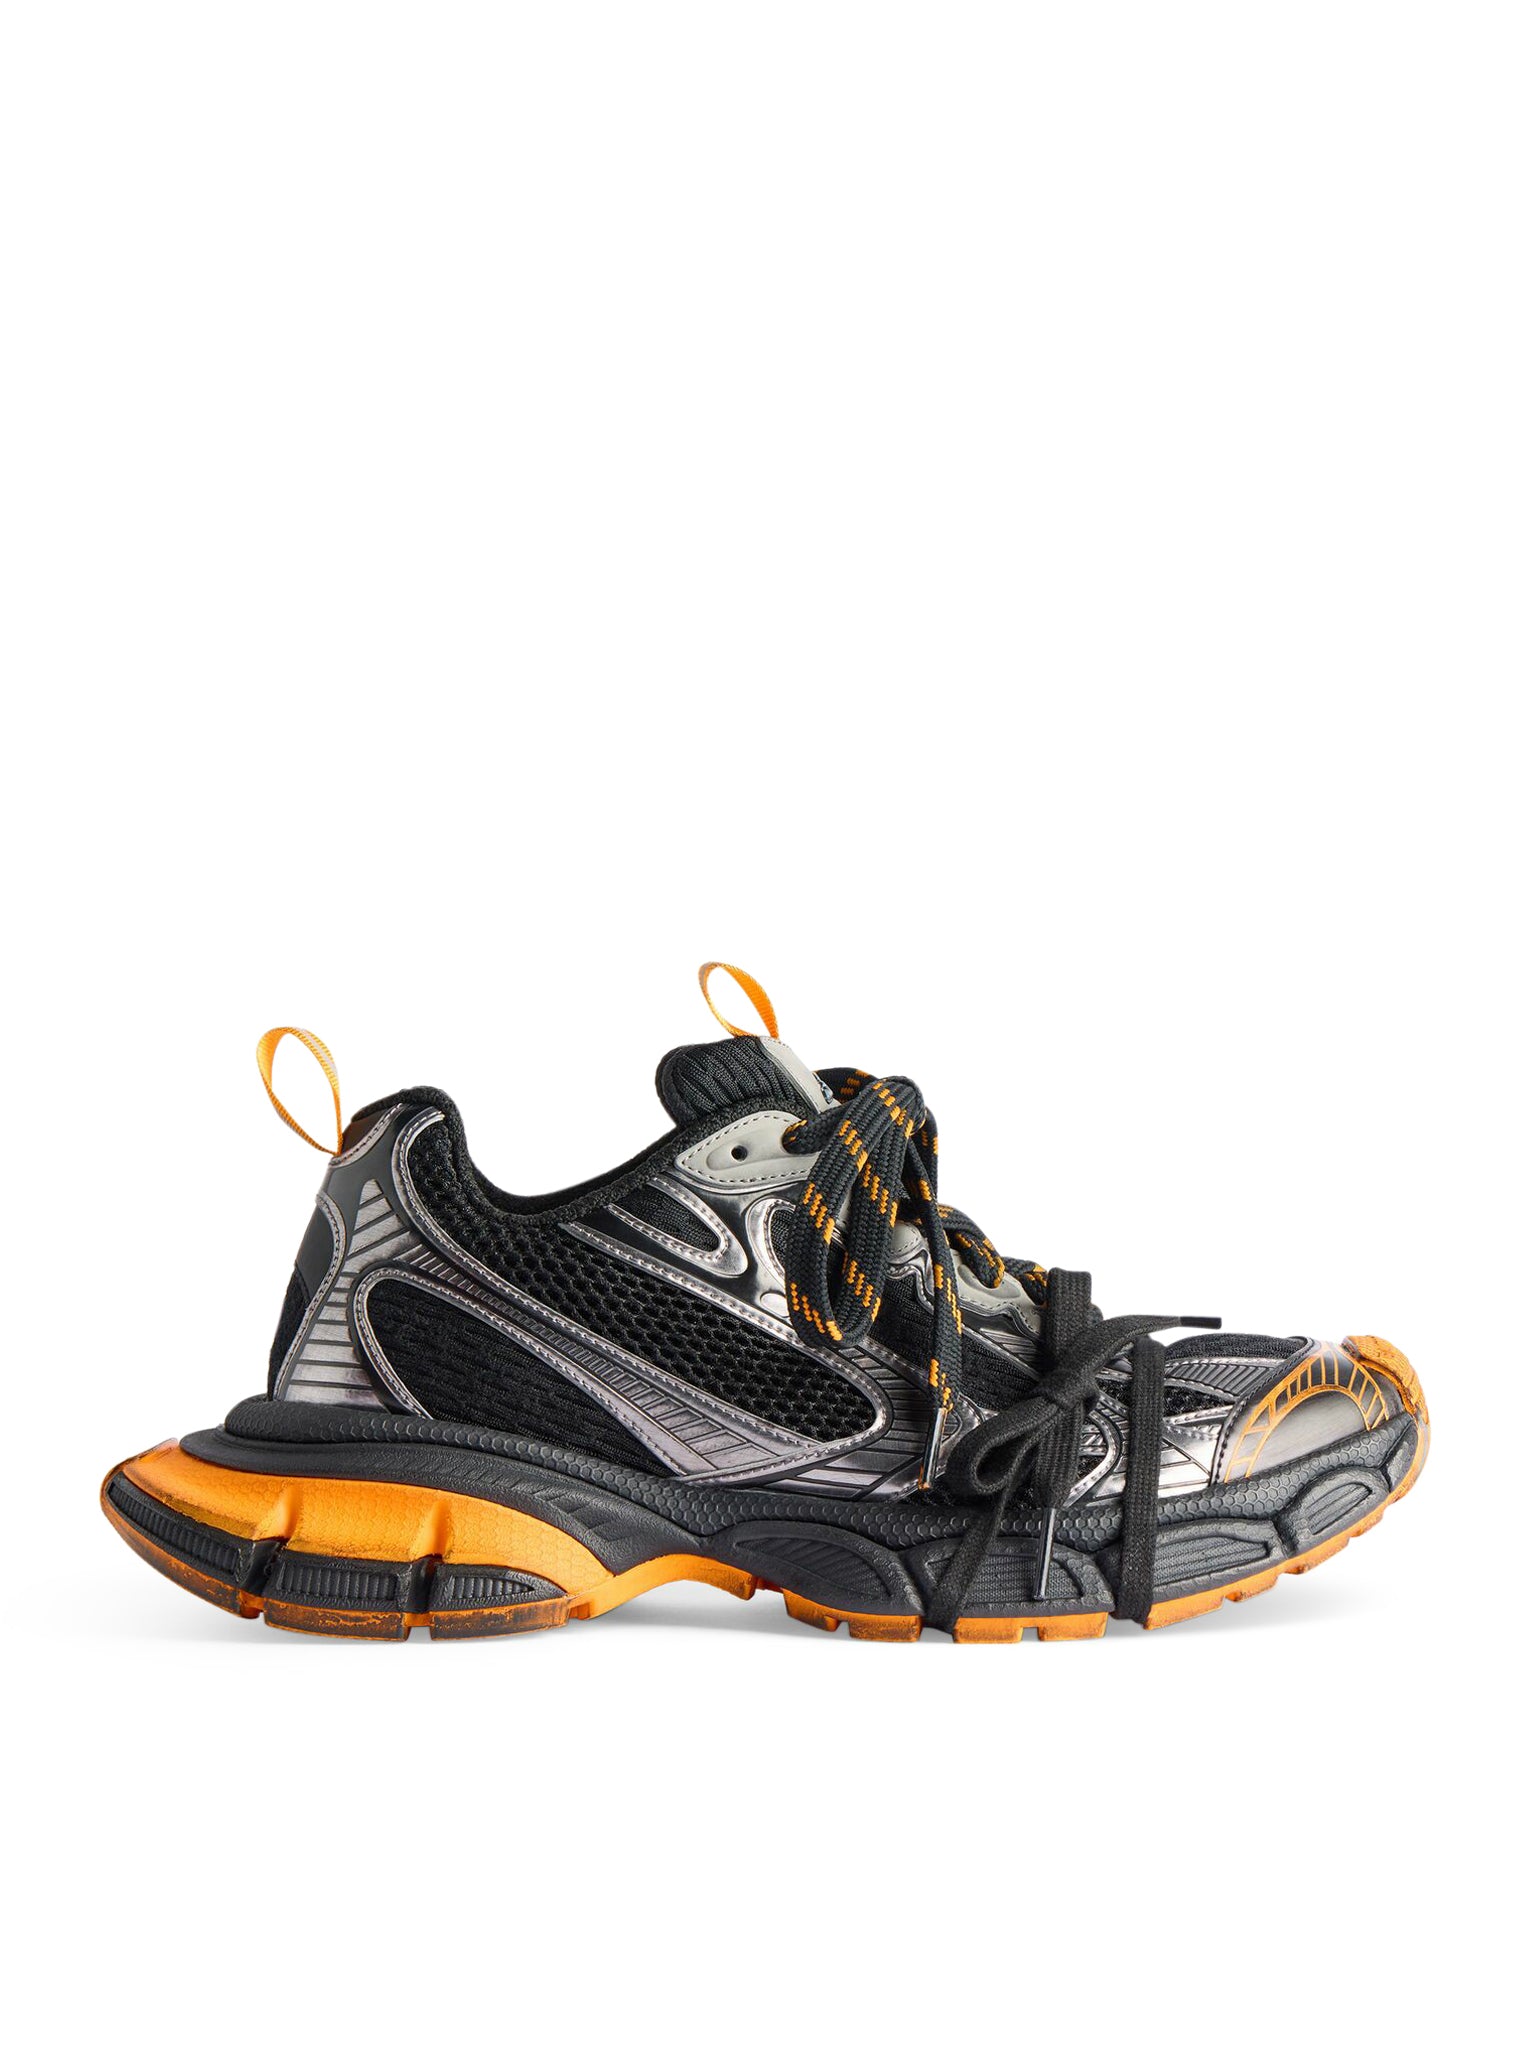 3XL sneaker in black, orange and gray mesh and polyurethane